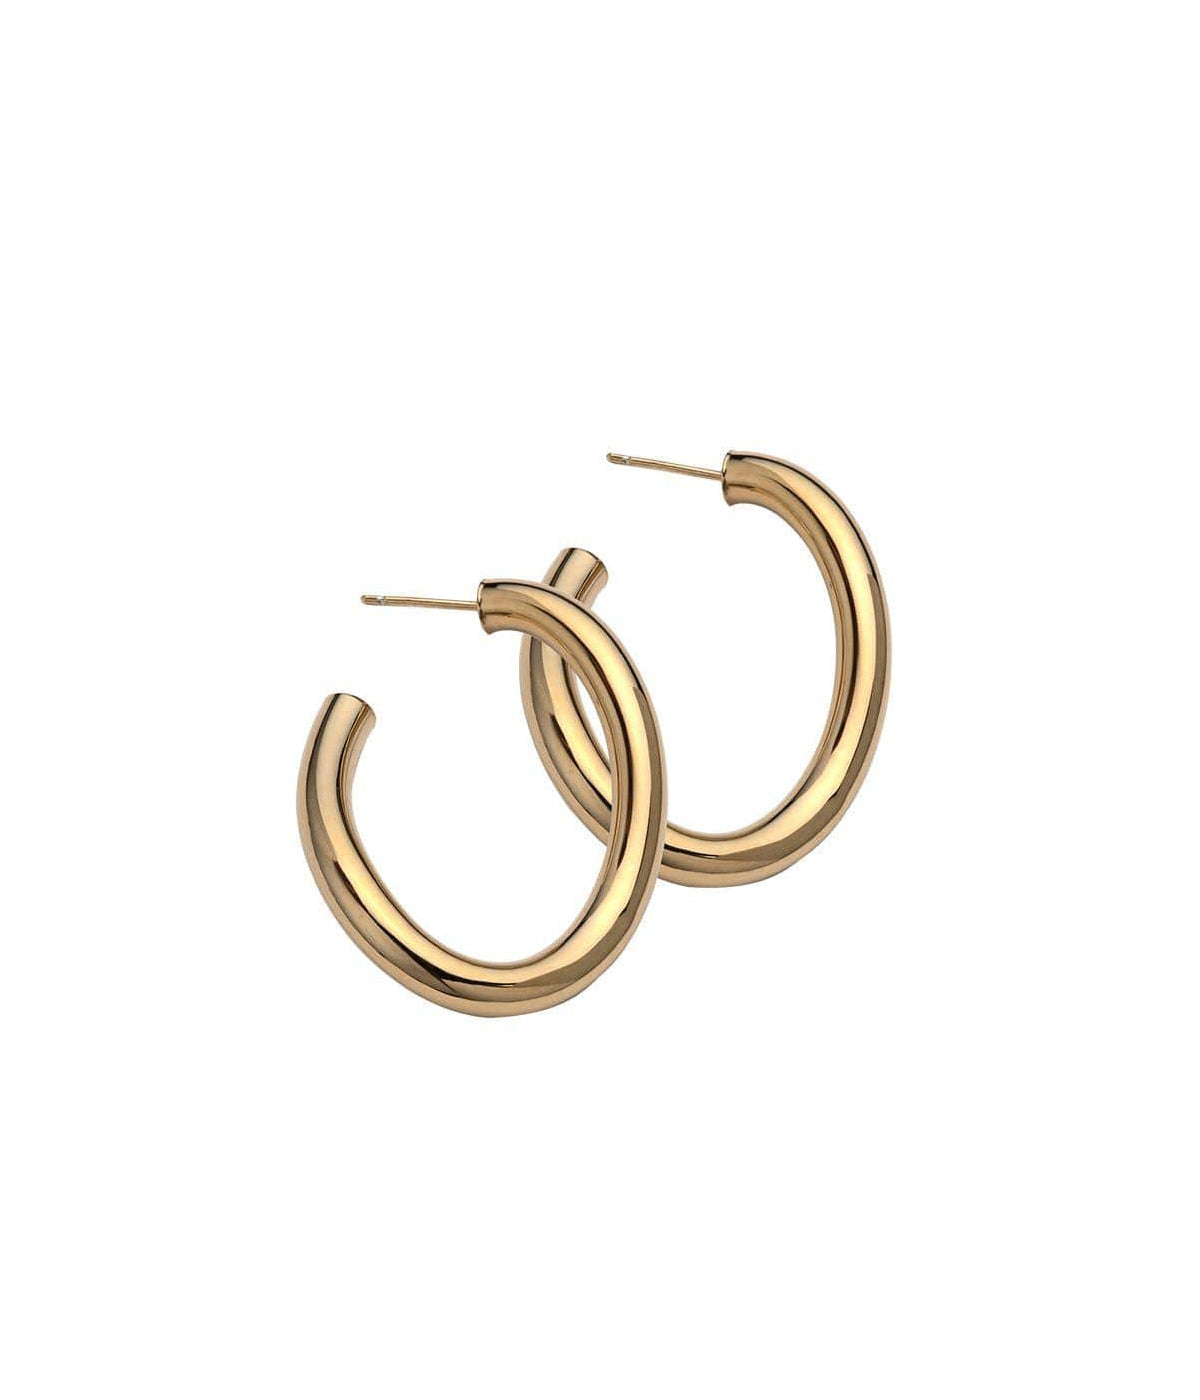 Edna 1.75 Hoops in 14K Yellow Gold Plated Silver